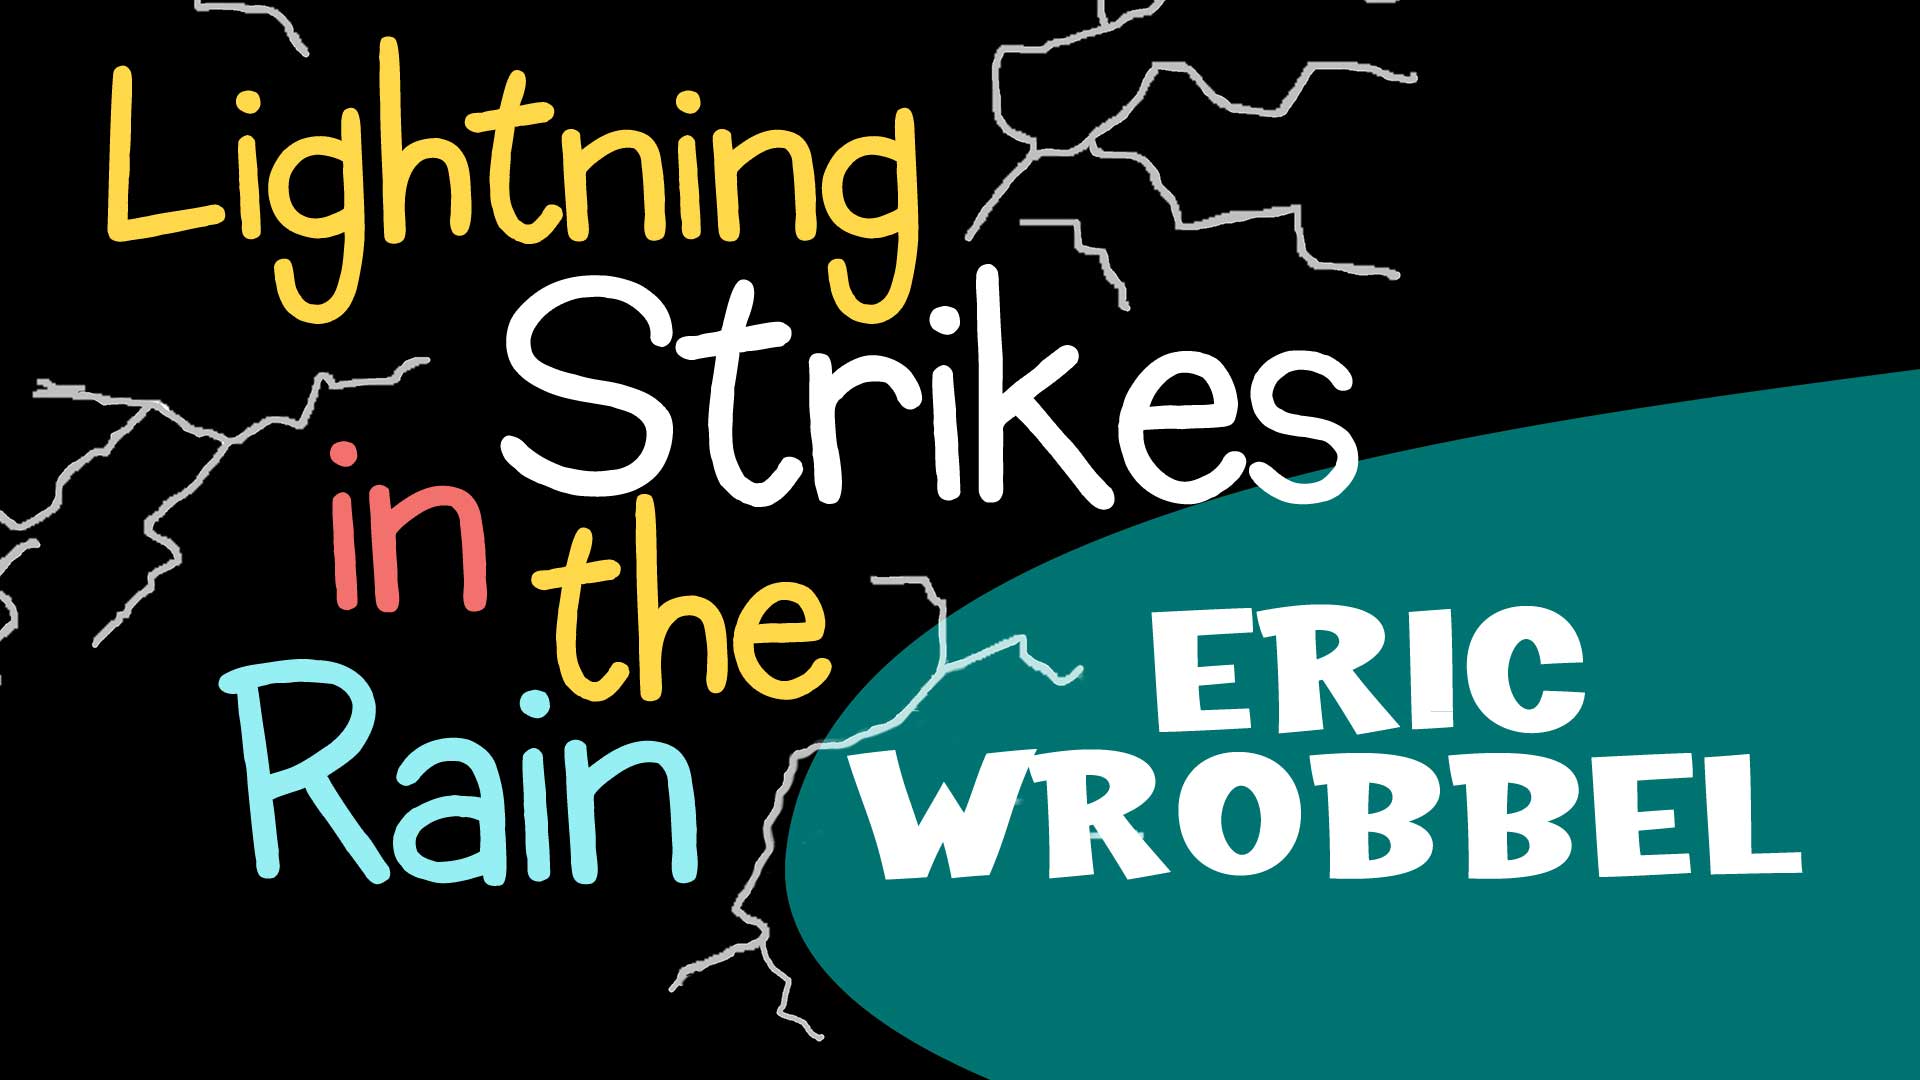 Lightning Strikes In the Rain by Eric Wrobbel